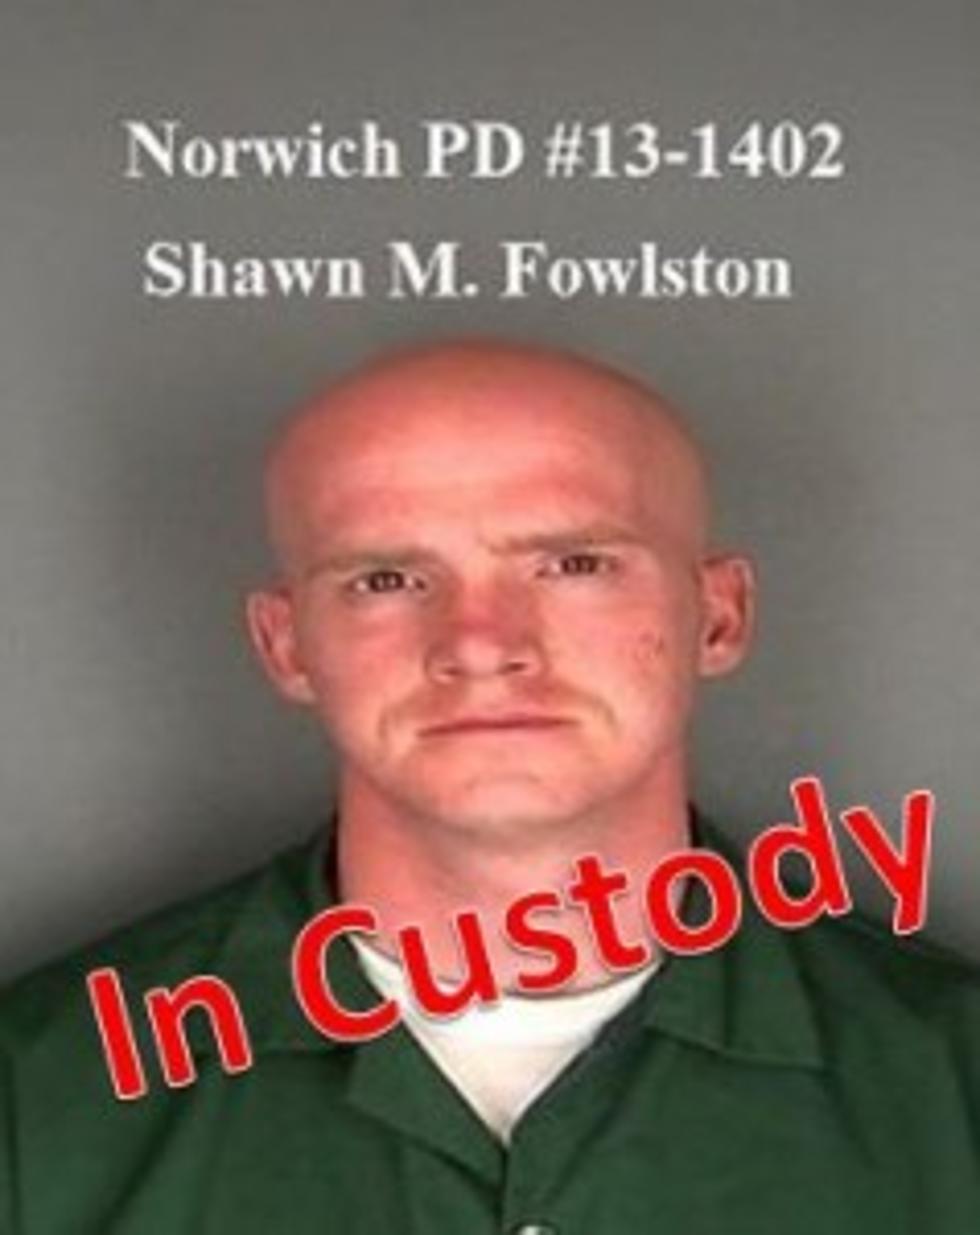 Chenango County Sex Offender Shawn Fowlston Found After Day-Long Manhunt